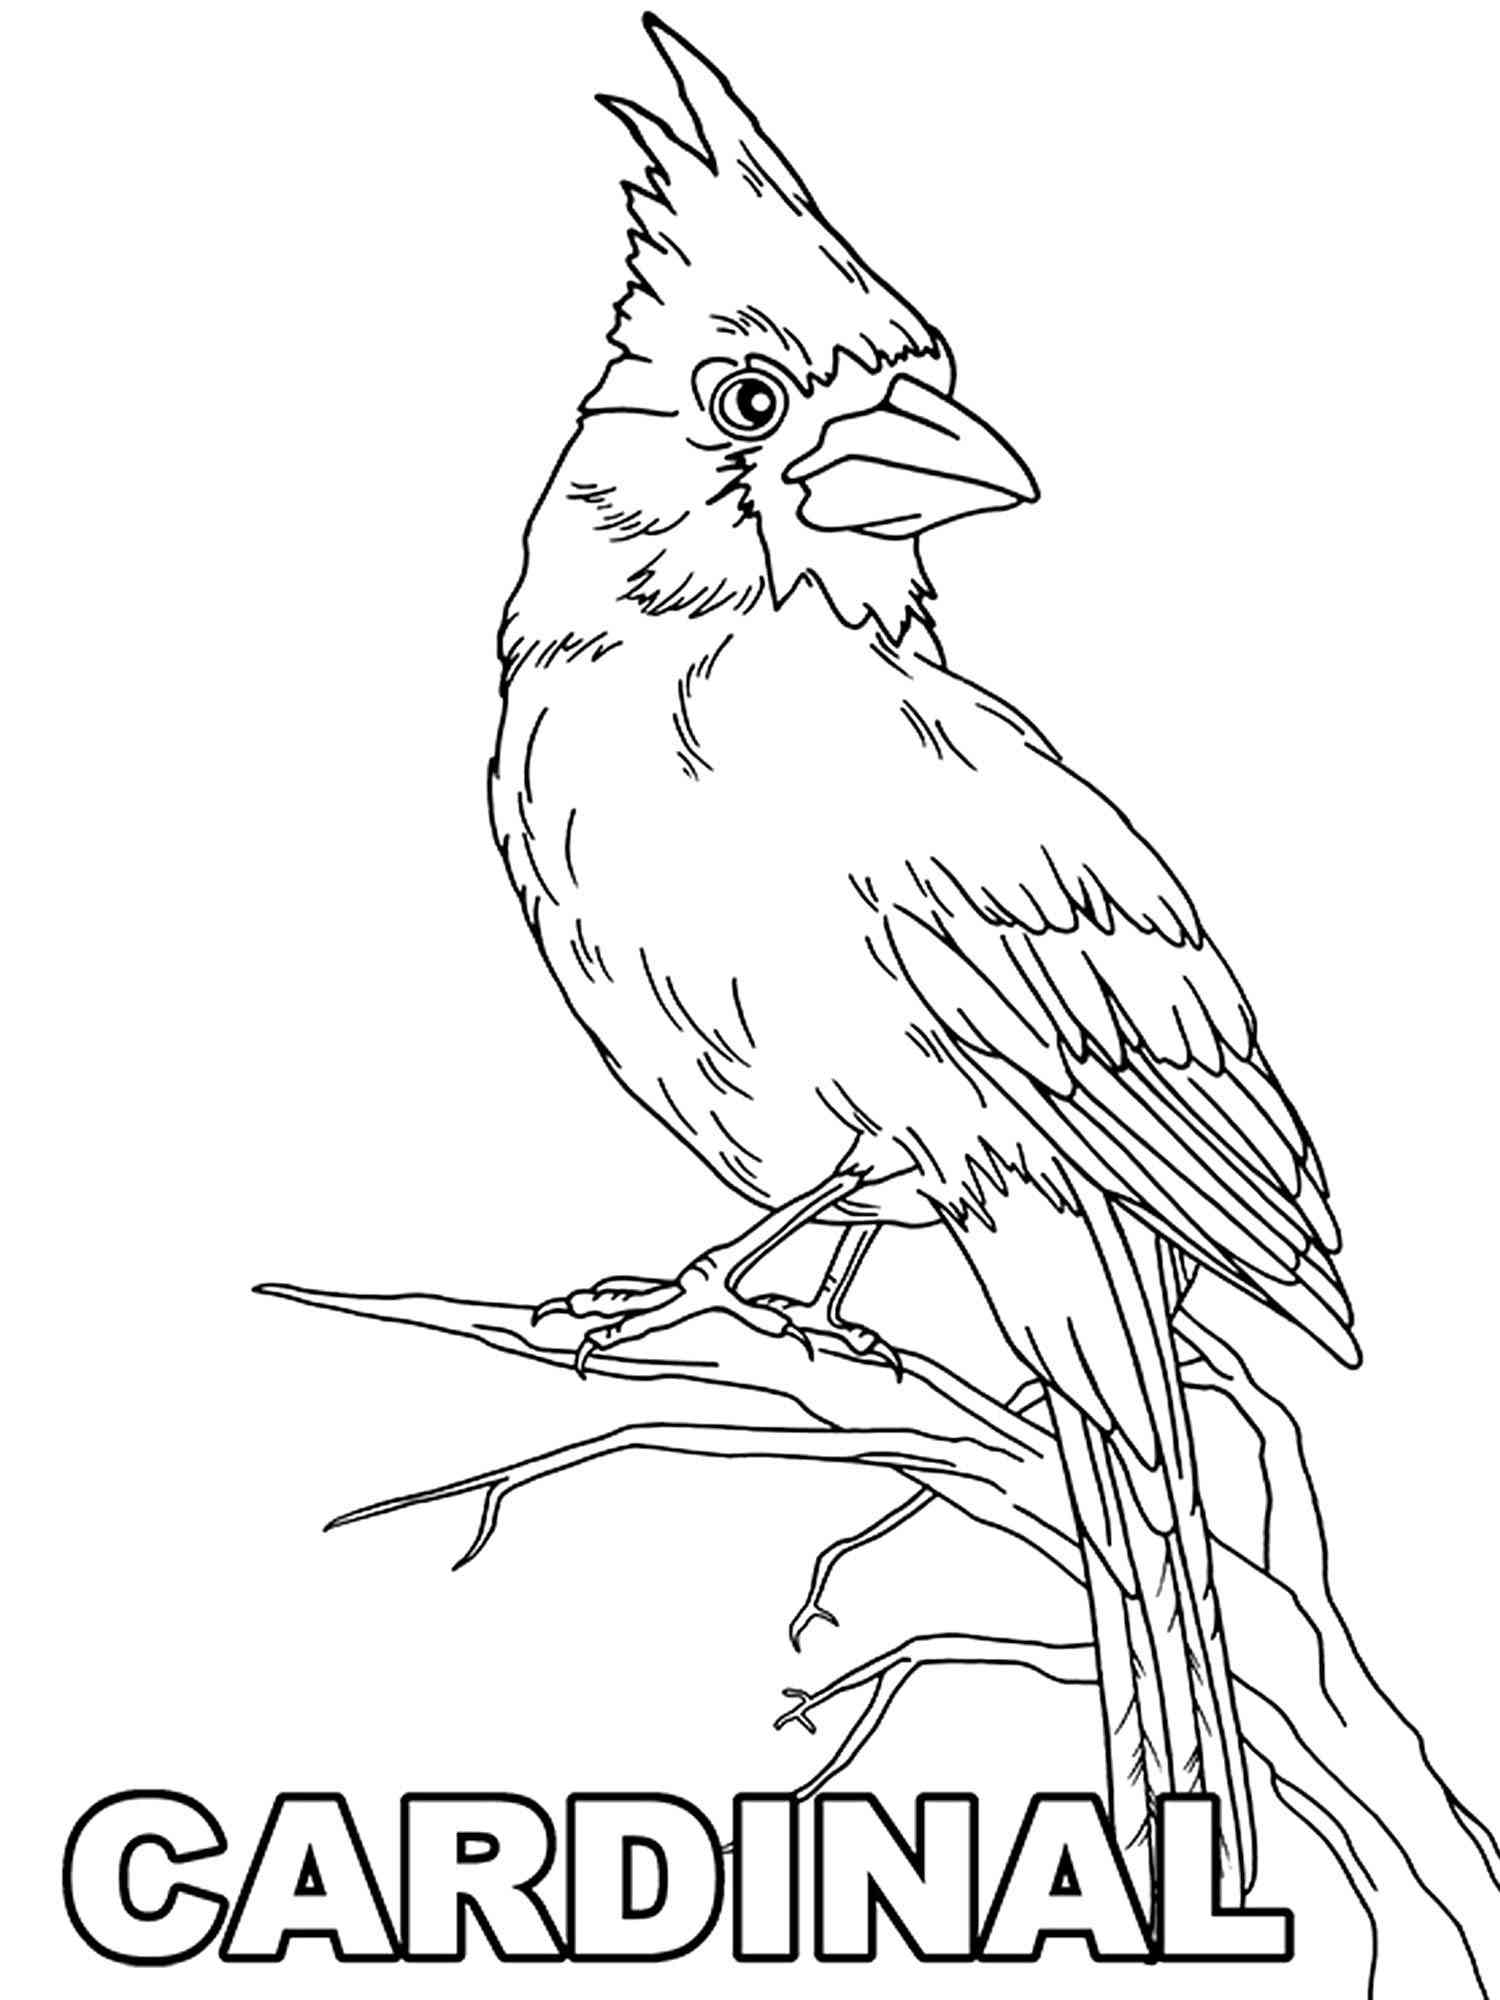 Realistic Cardinal coloring page